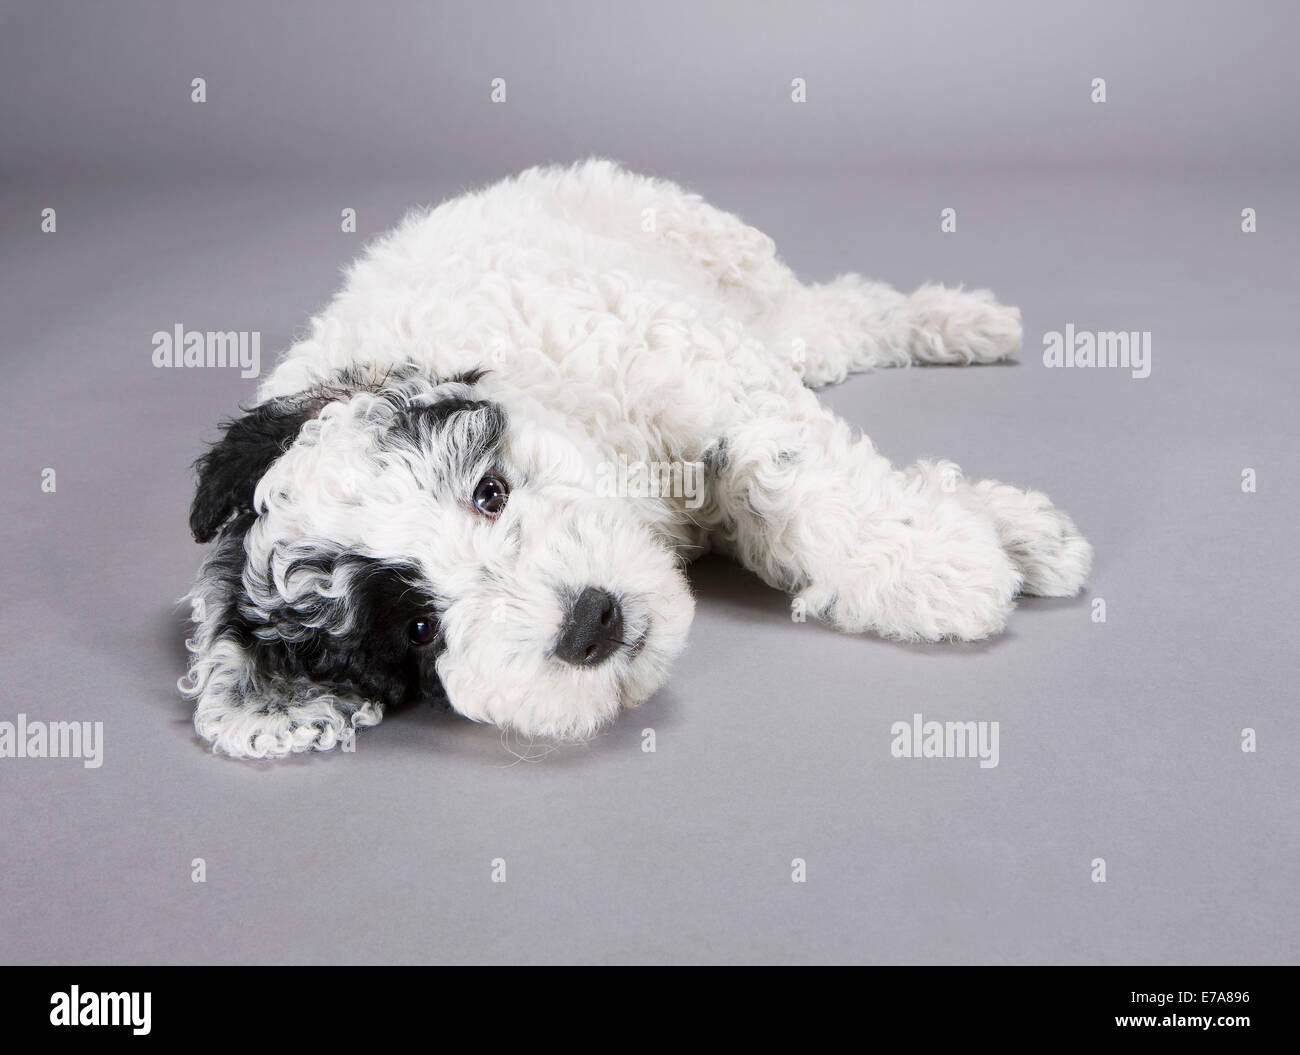 A black and white Portuguese Water Dog lying on its side Stock Photo